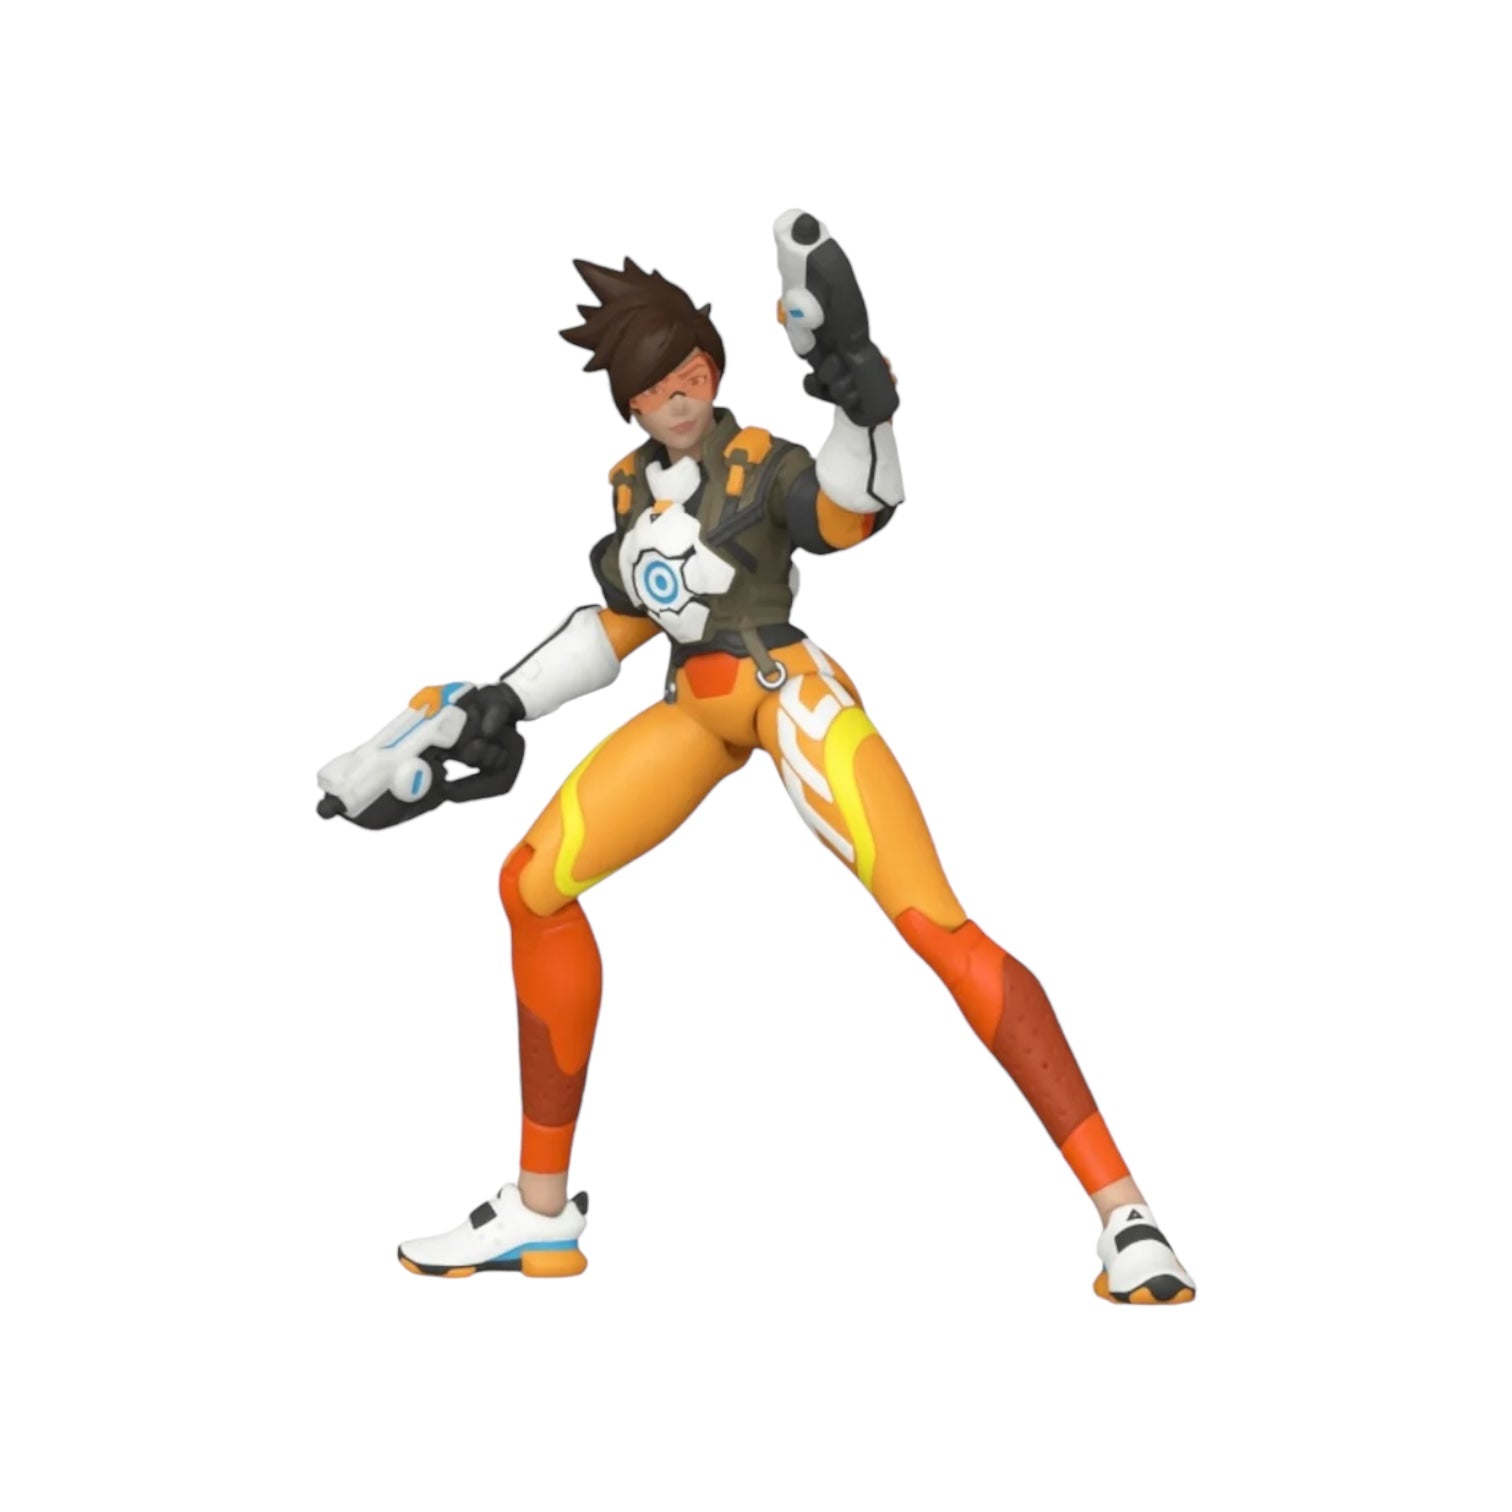 Tracer - Overwatch 2 - Collectible Funko Action Figure